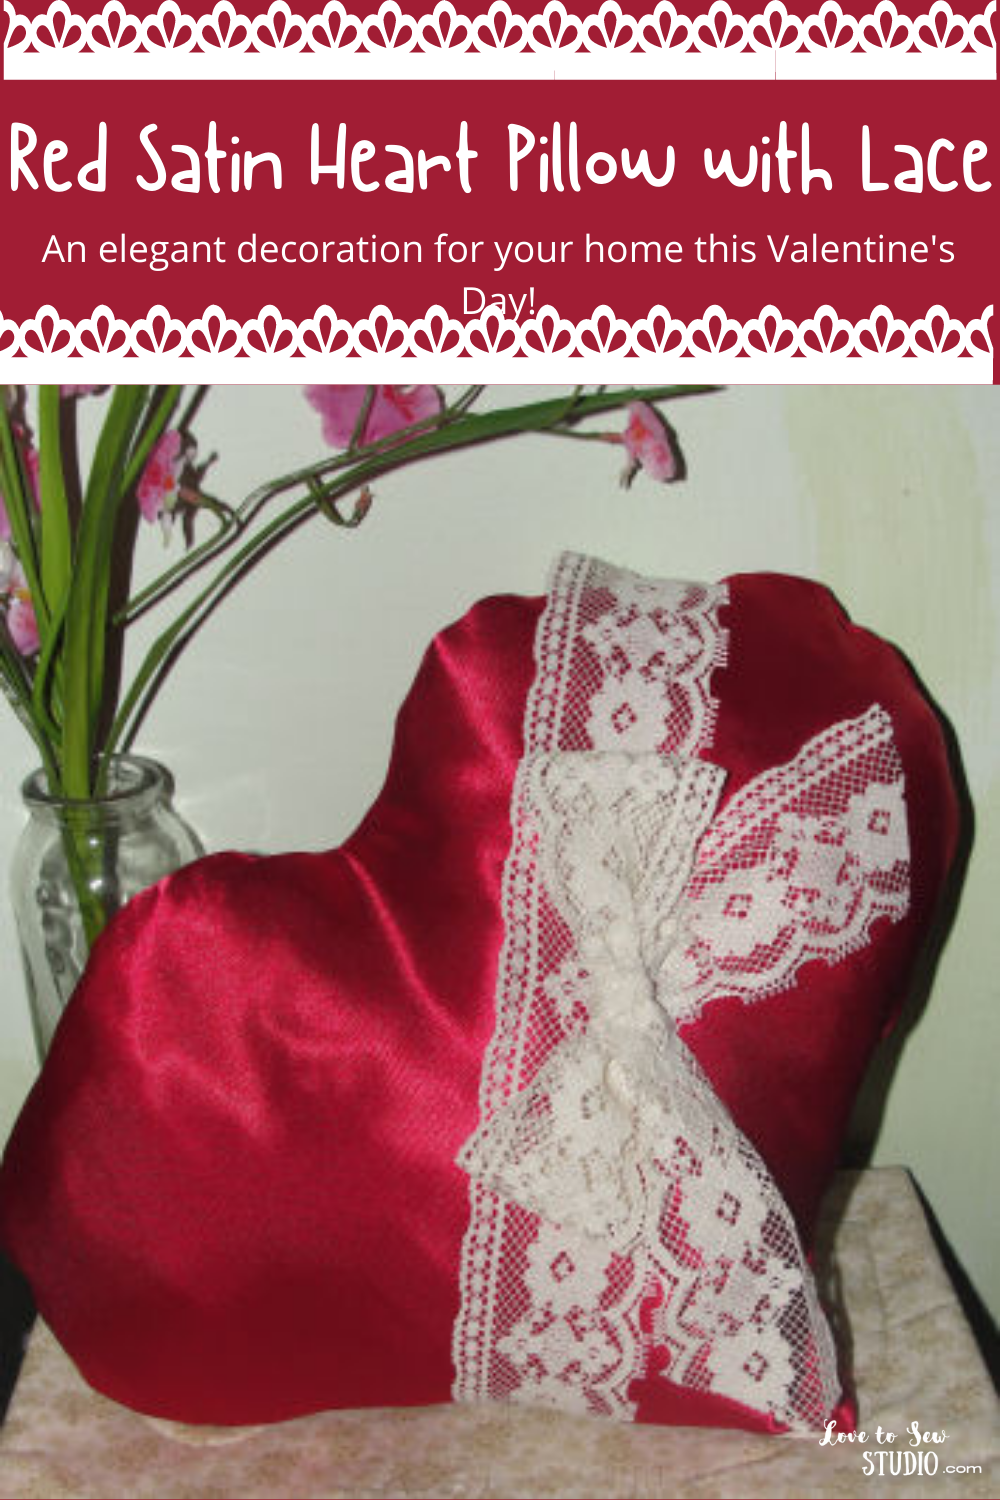 https://www.lovetosewstudio.com/wp-content/uploads/2022/02/Red-Satin-Heart-Pillow-with-Lace.png